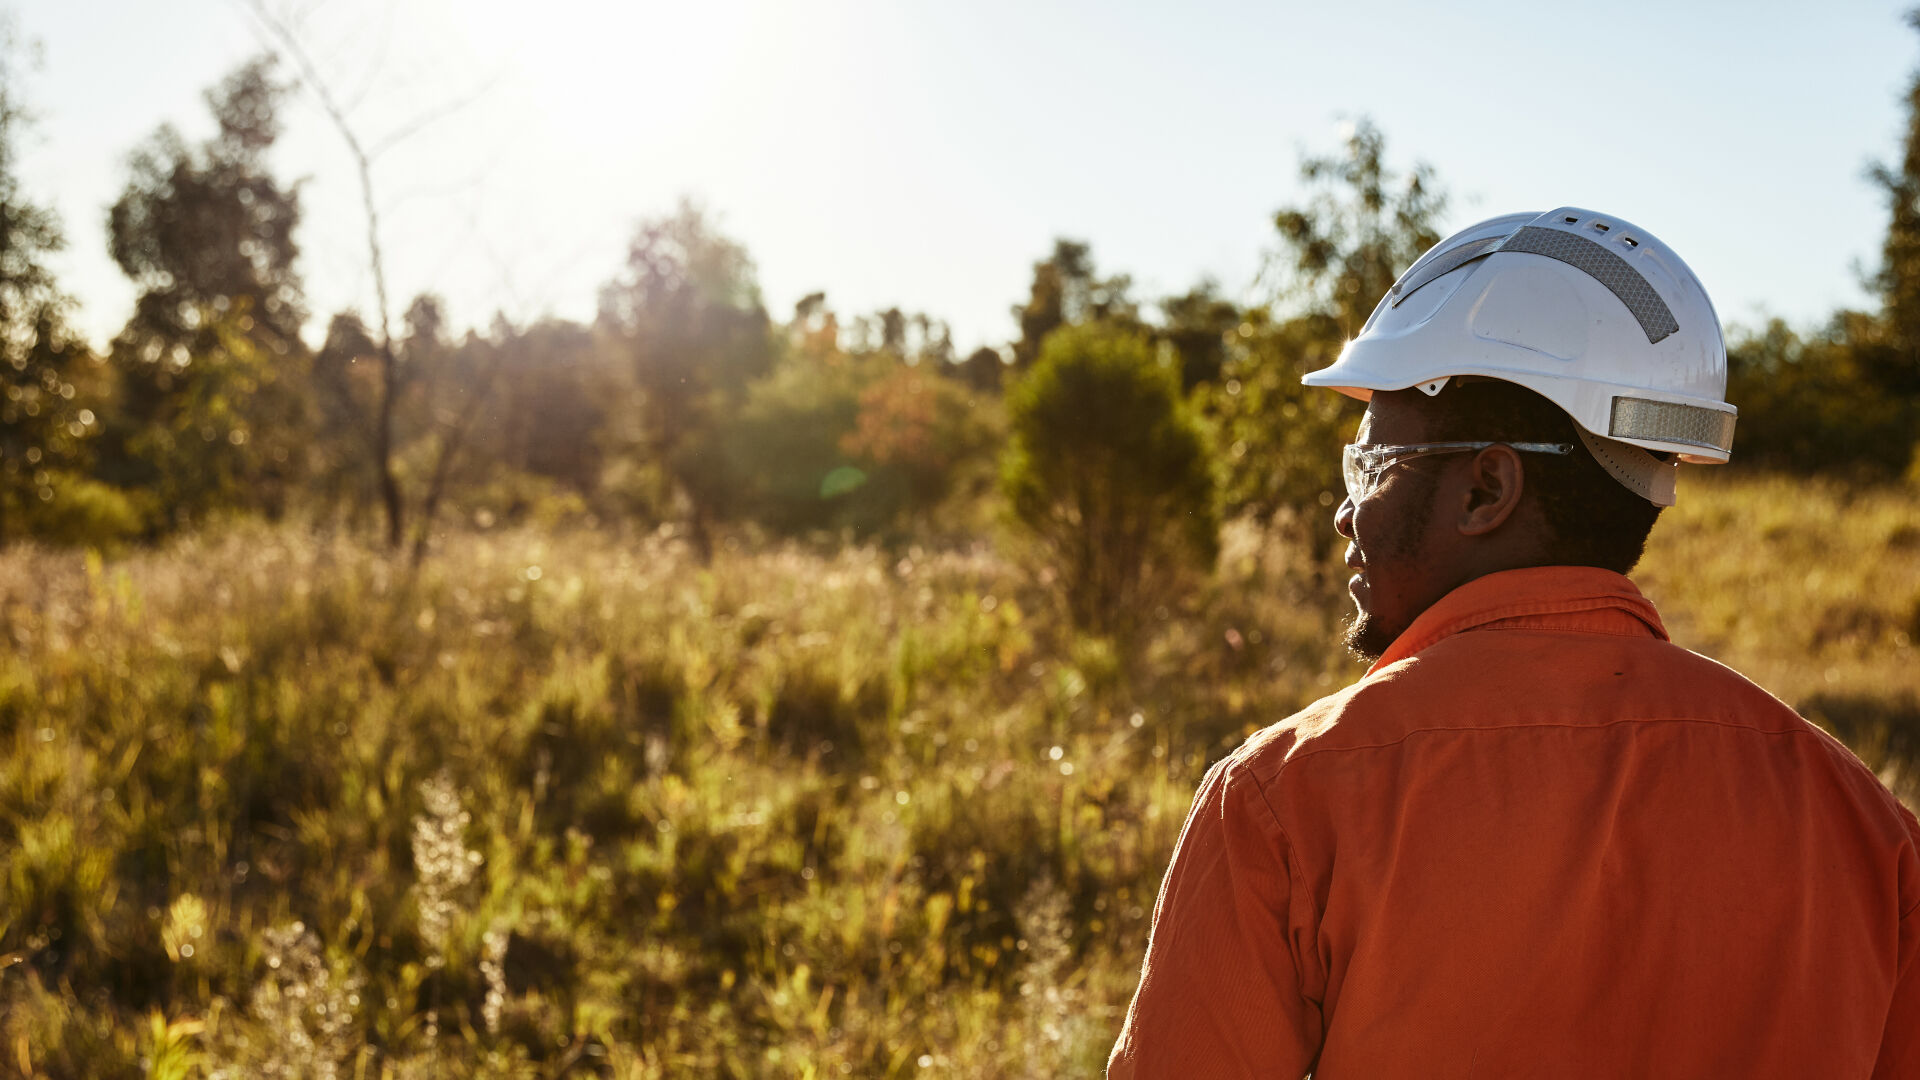 Thiess has a strong track record in responsible environmental management